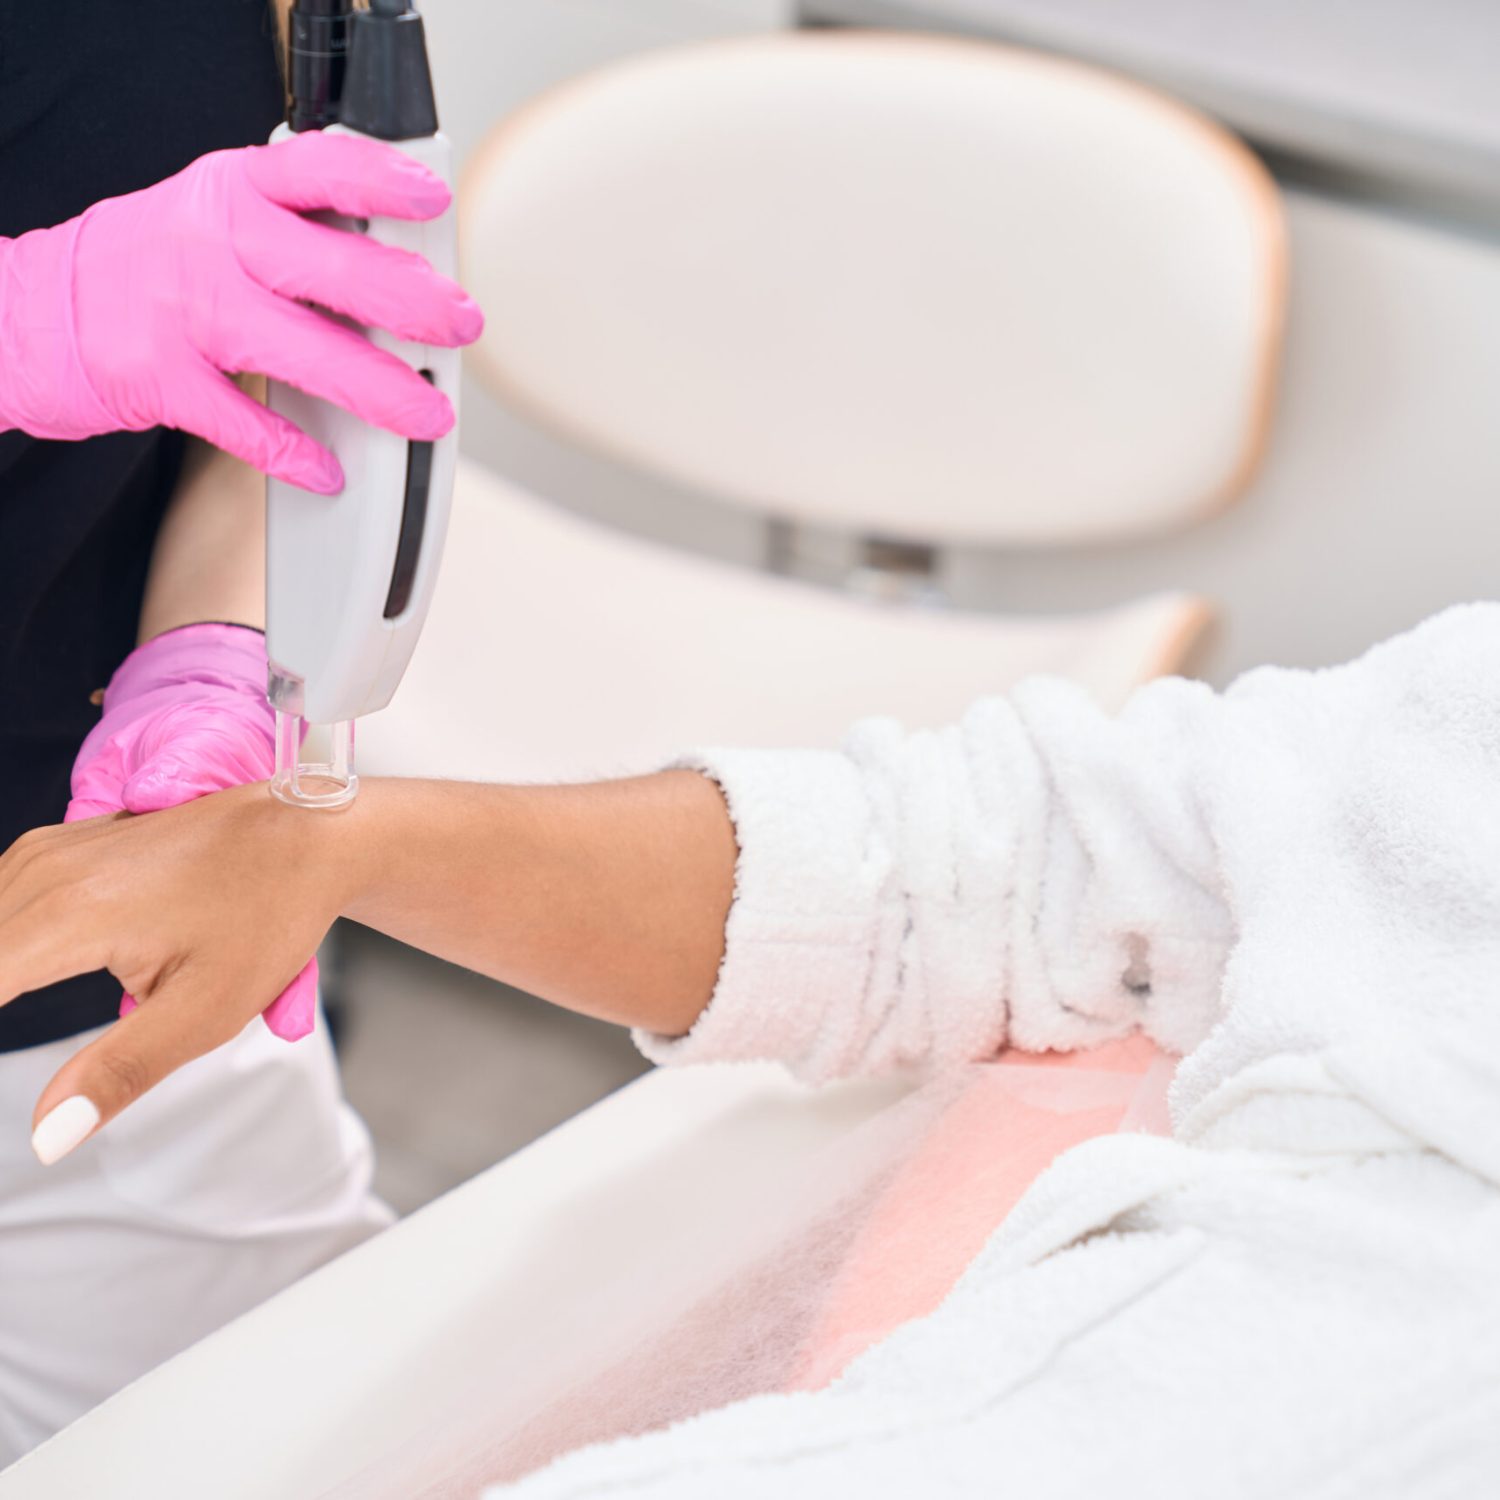 Safe procedure of laser hair removal of hands in a modern aesthetic medicine salon